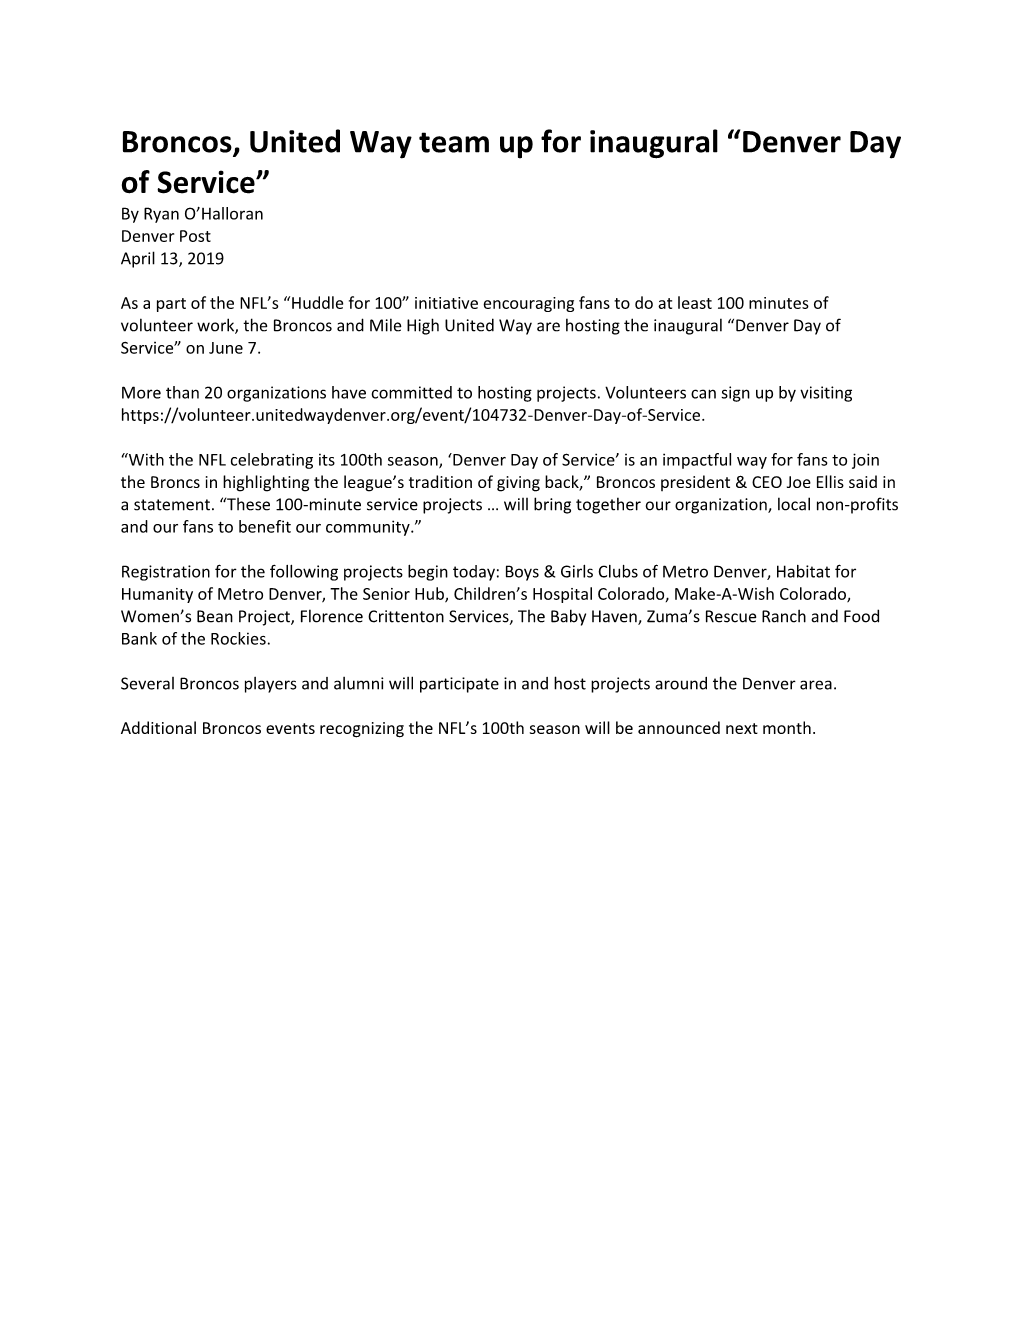 Broncos, United Way Team up for Inaugural “Denver Day of Service” by Ryan O’Halloran Denver Post April 13, 2019